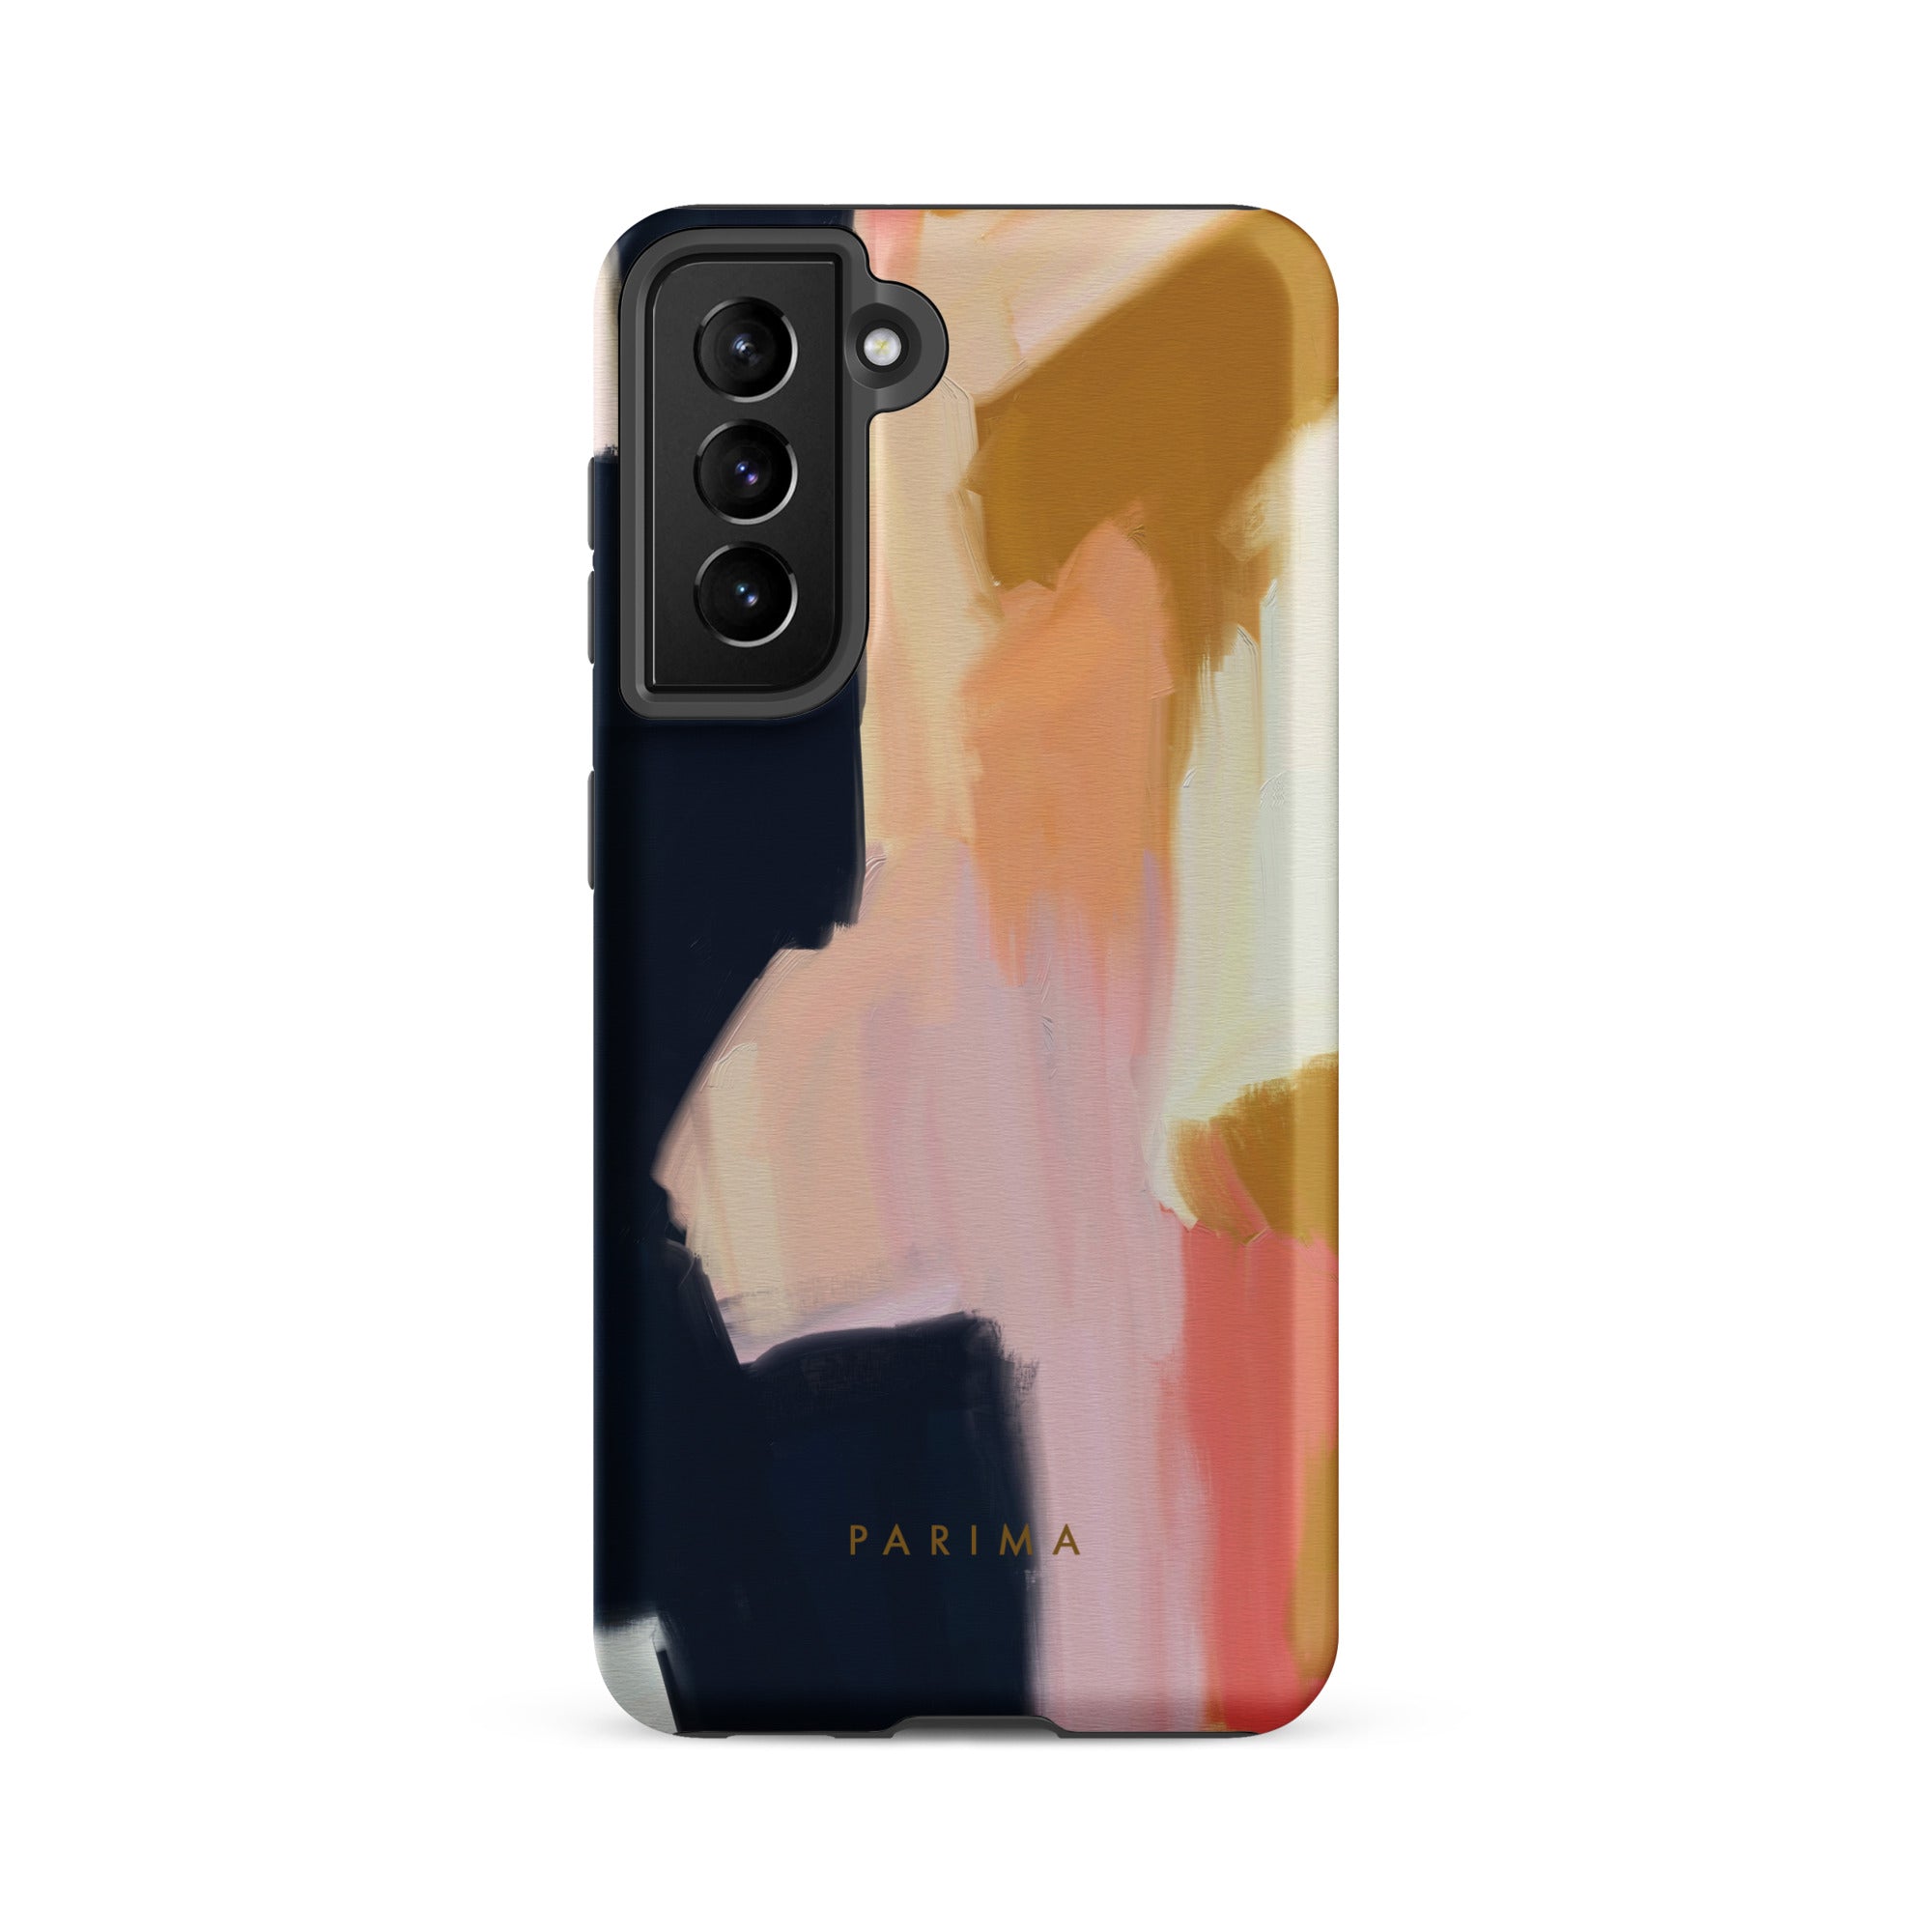 Kali, pink and gold abstract art on Samsung Galaxy S21 FE tough case by Parima Studio